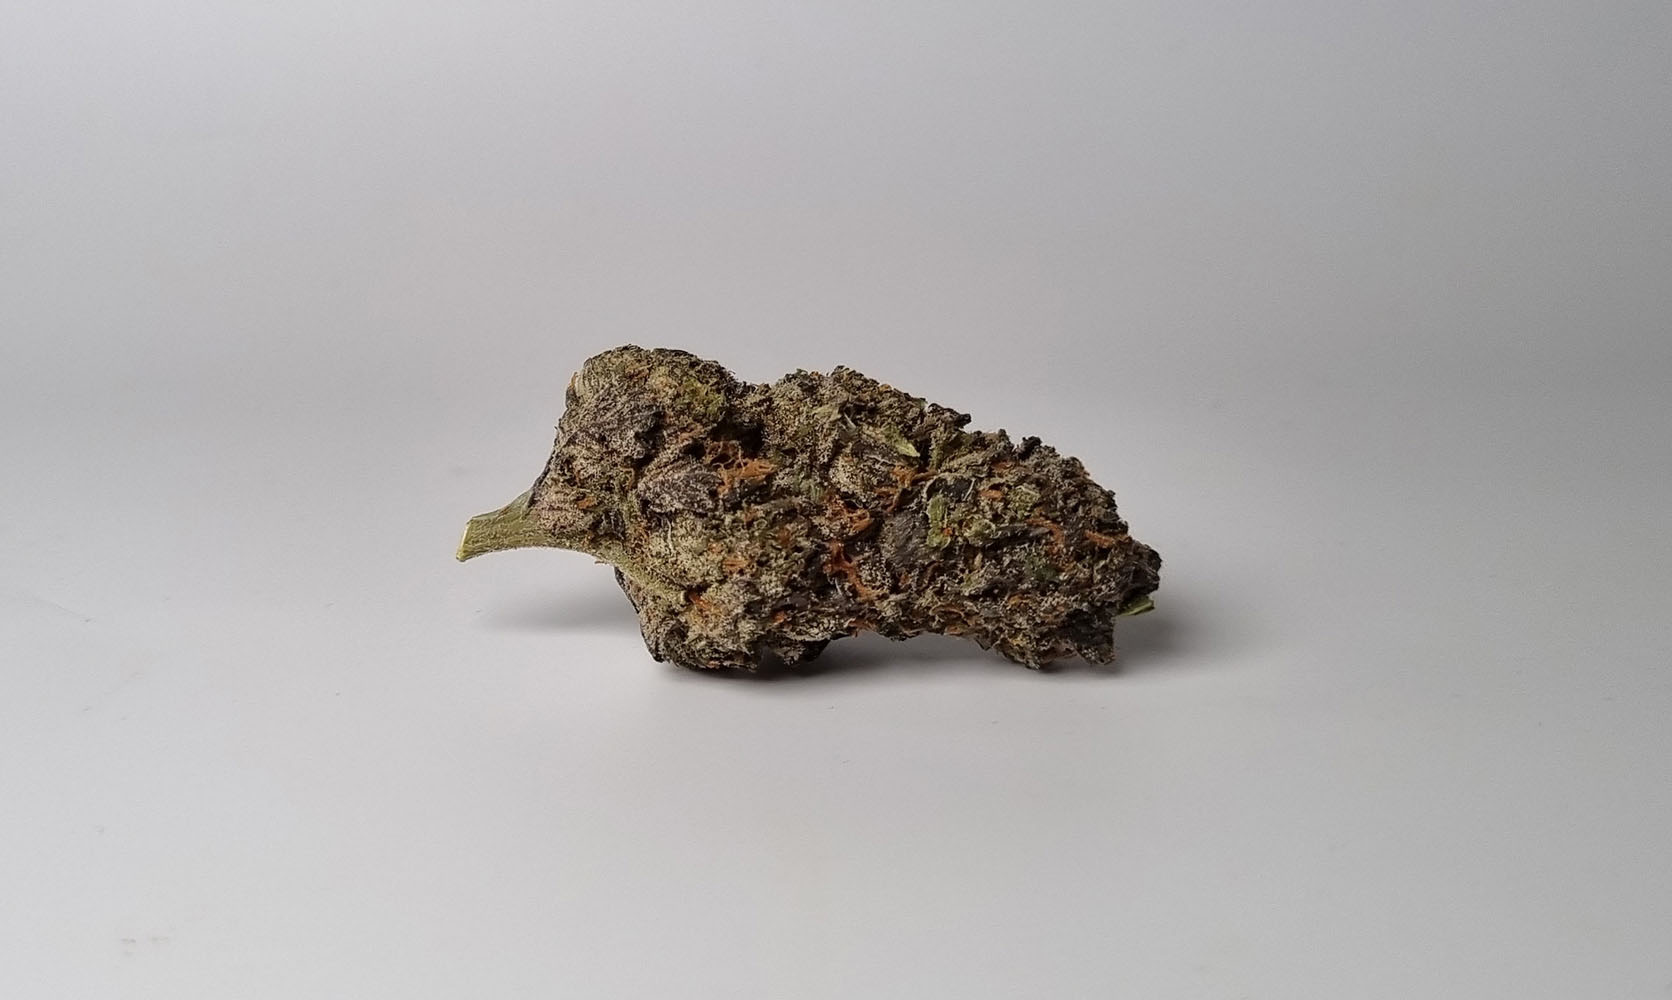 Pinkman Goo Strain budget bud weed online Canada. Buy weed online. Weed dispensary for BC cannabis and Alberta cannabis.